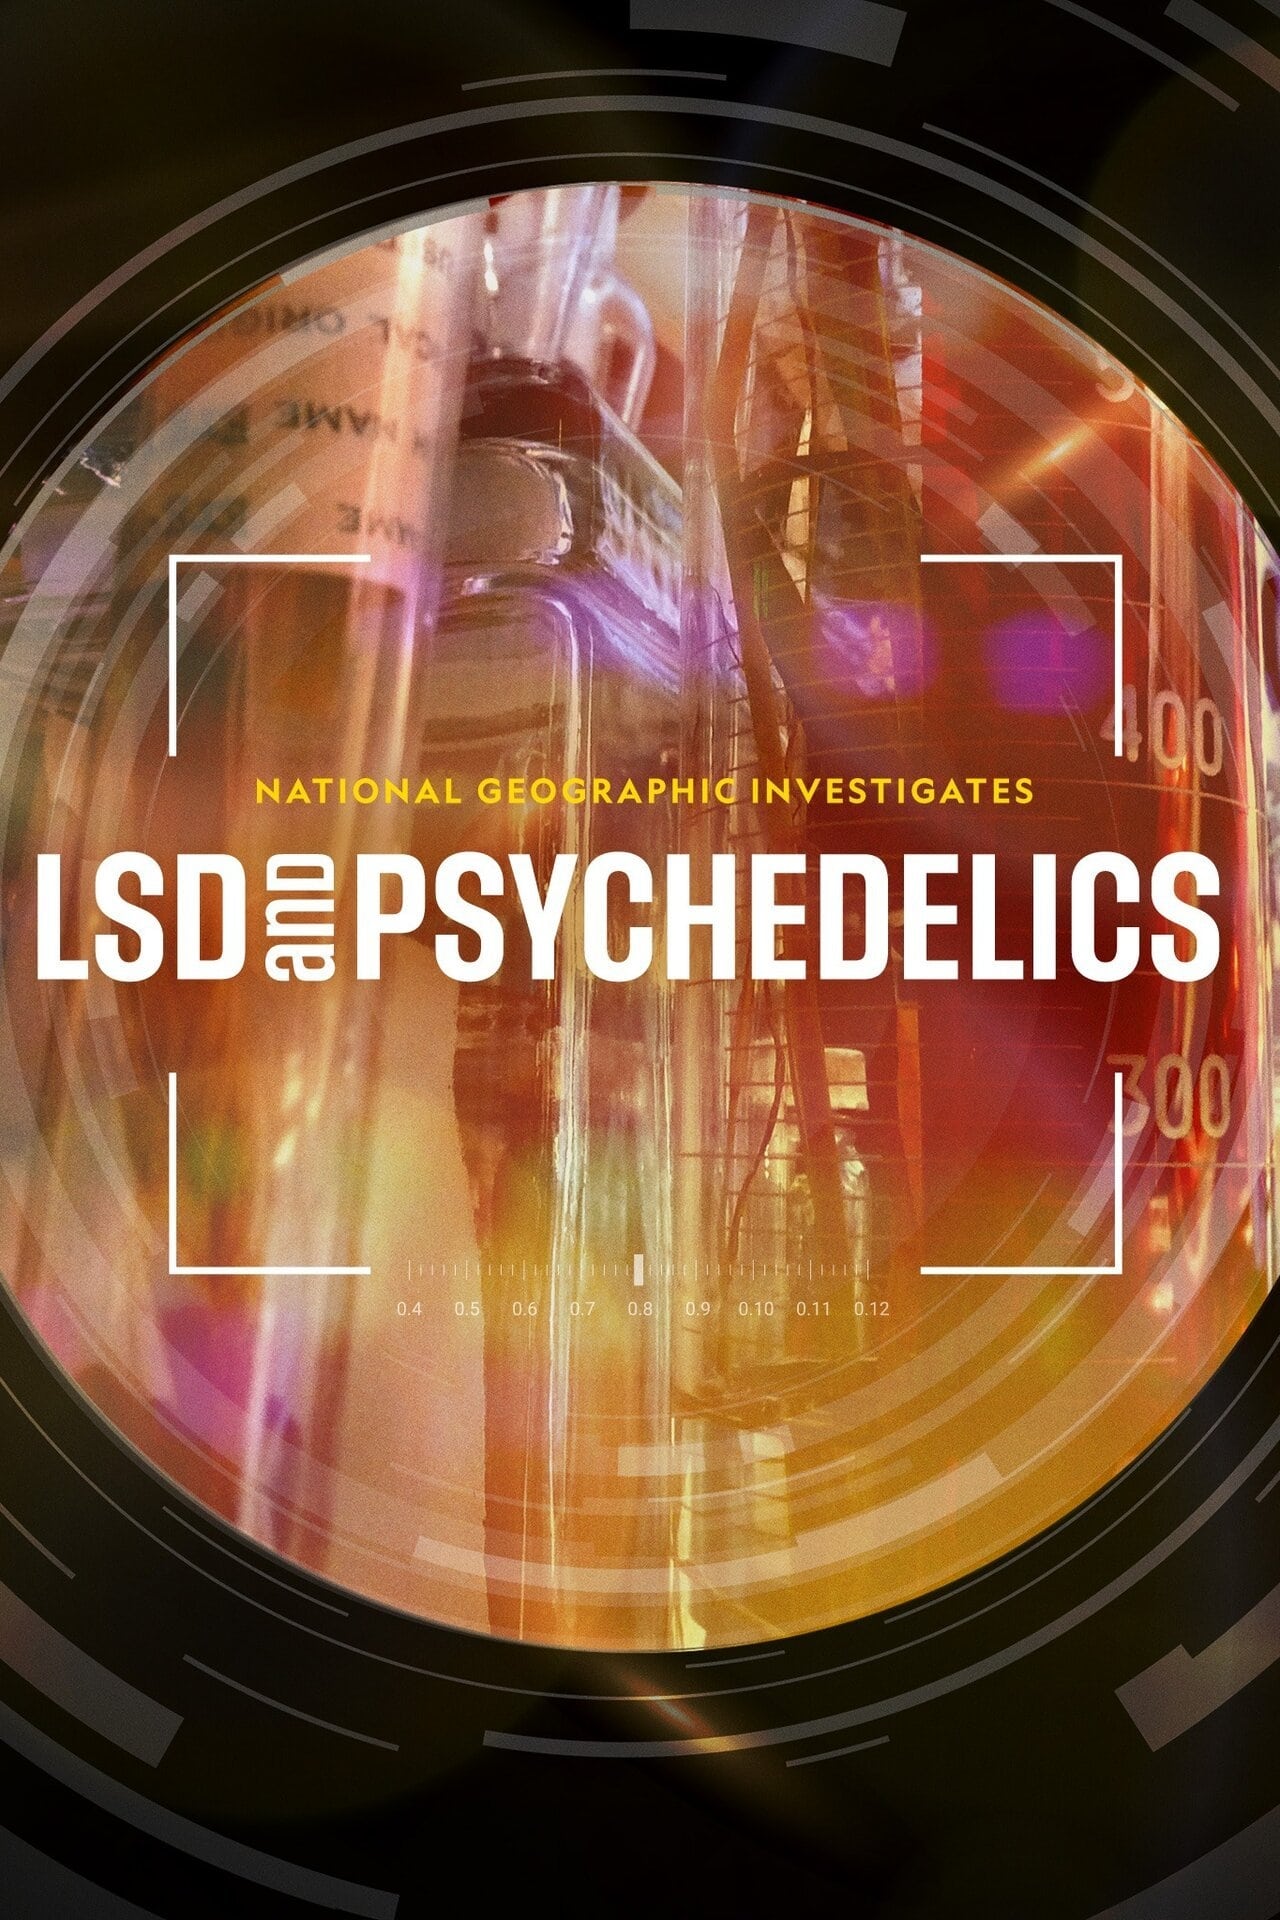 National Geographic Investigates: LSD and Psychedelics